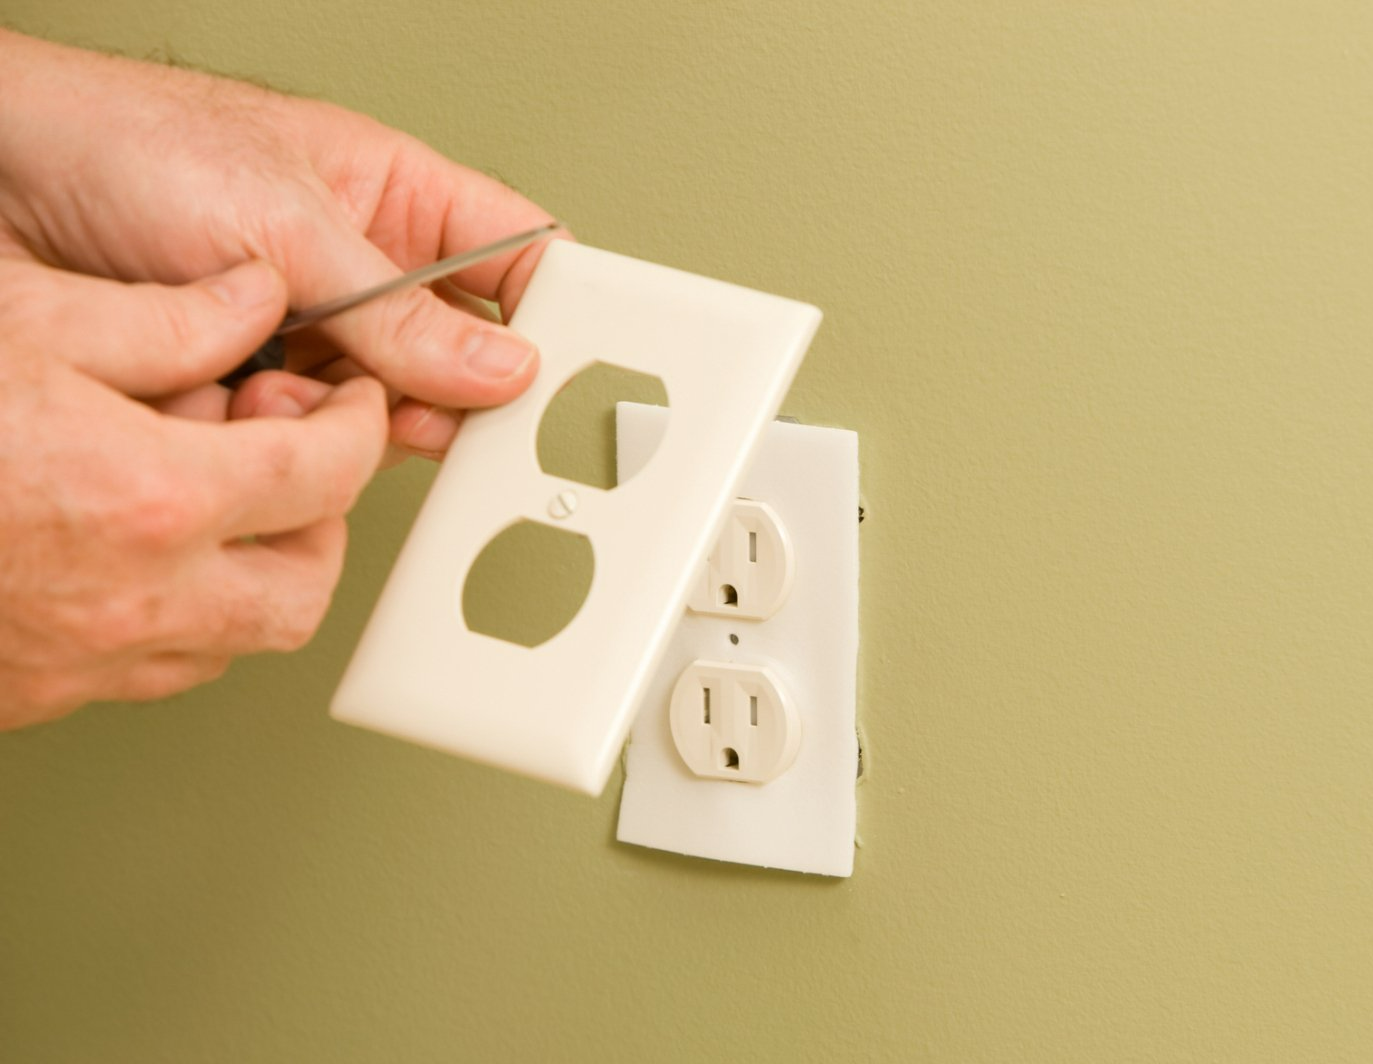 Electric Repair Services — Electrician Repairing the Outlet in Sumner, WA